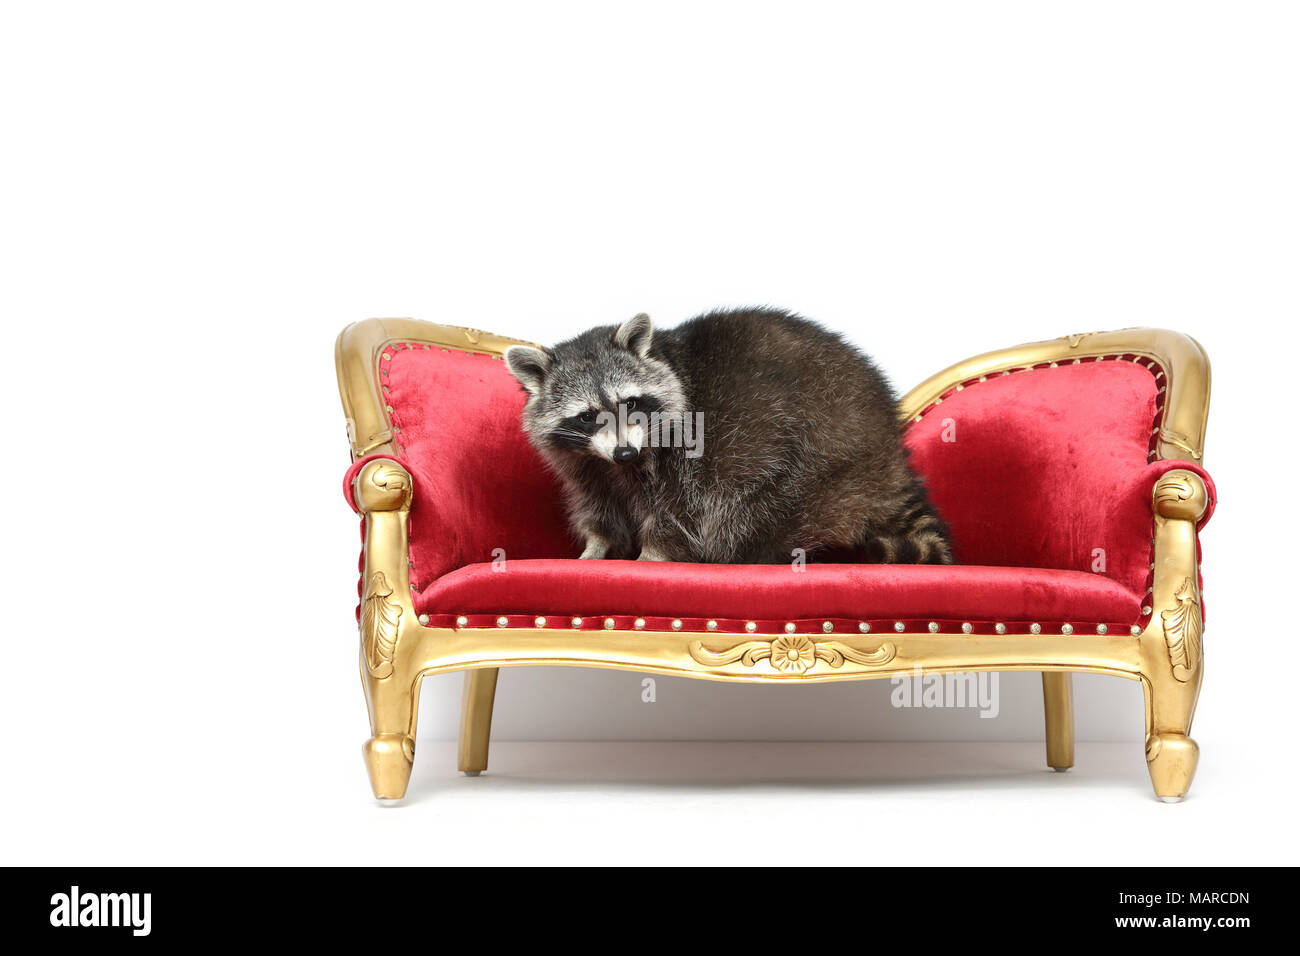 Raccoon (Procyon lotor). Adult standing on a baroque couch. Studio picture against a white background. Germany Stock Photo